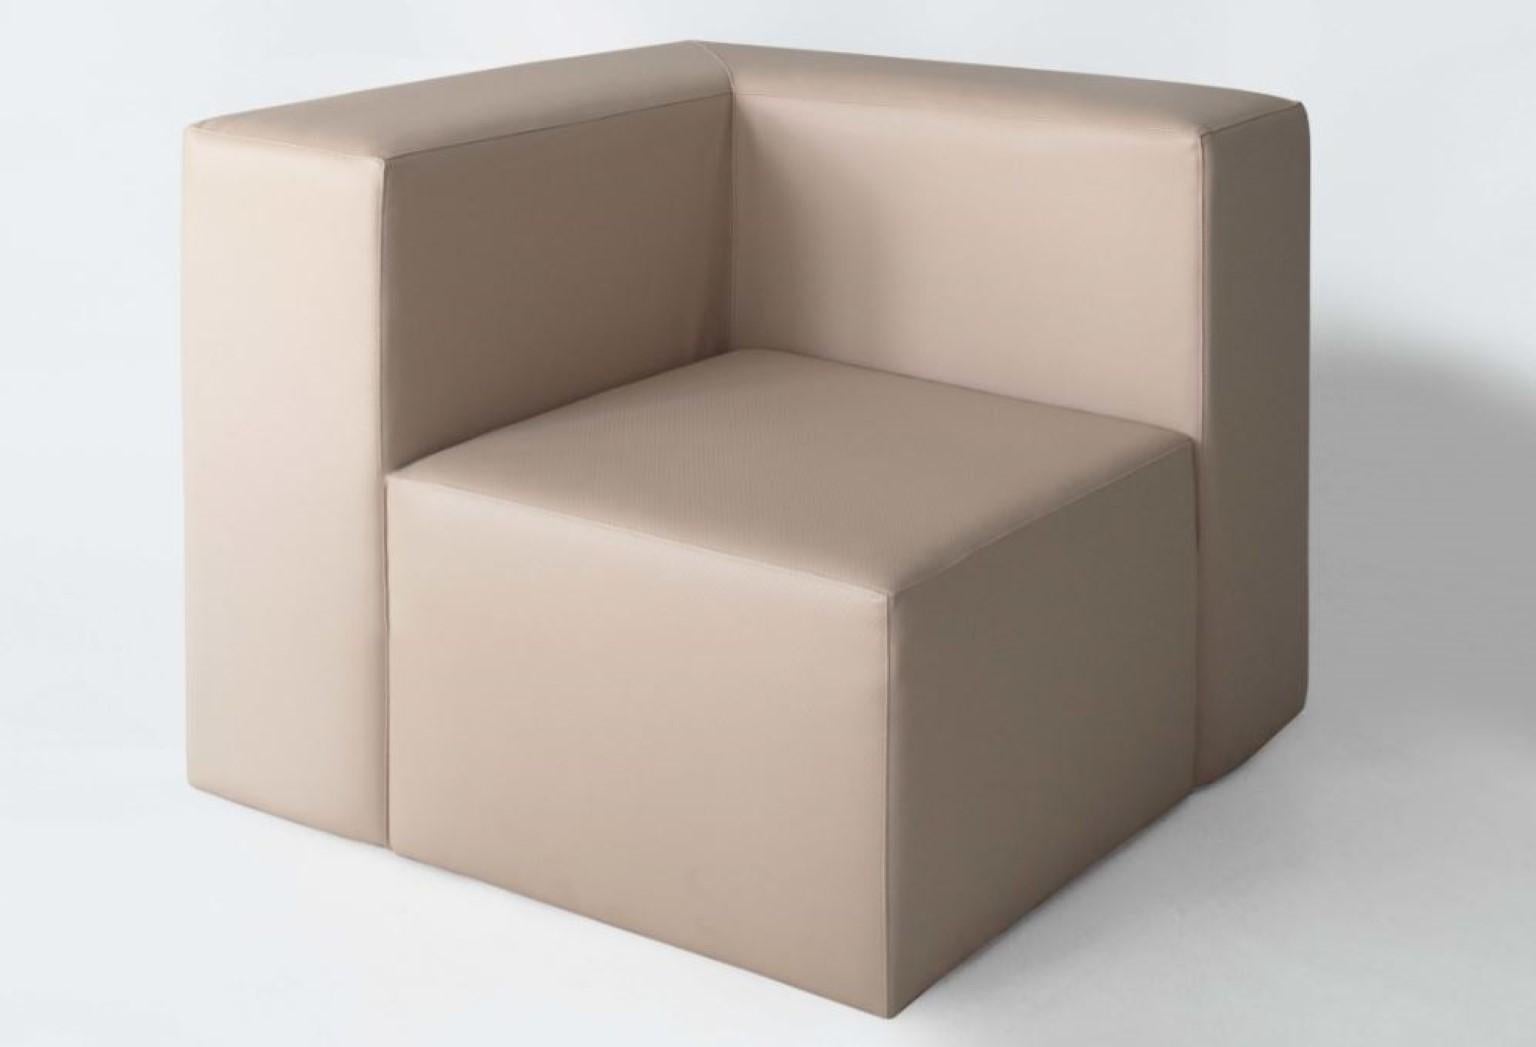 Cubit seat Module in Marine leather by Studio Christinekalia
Dimensions: W 90 x D 90 x H 75 cm (seat height 45 cm).
Materials: Plush Fabric, Marine Leather, wood.

Christine Kalia is a design studio exploring modes of spatial relations between